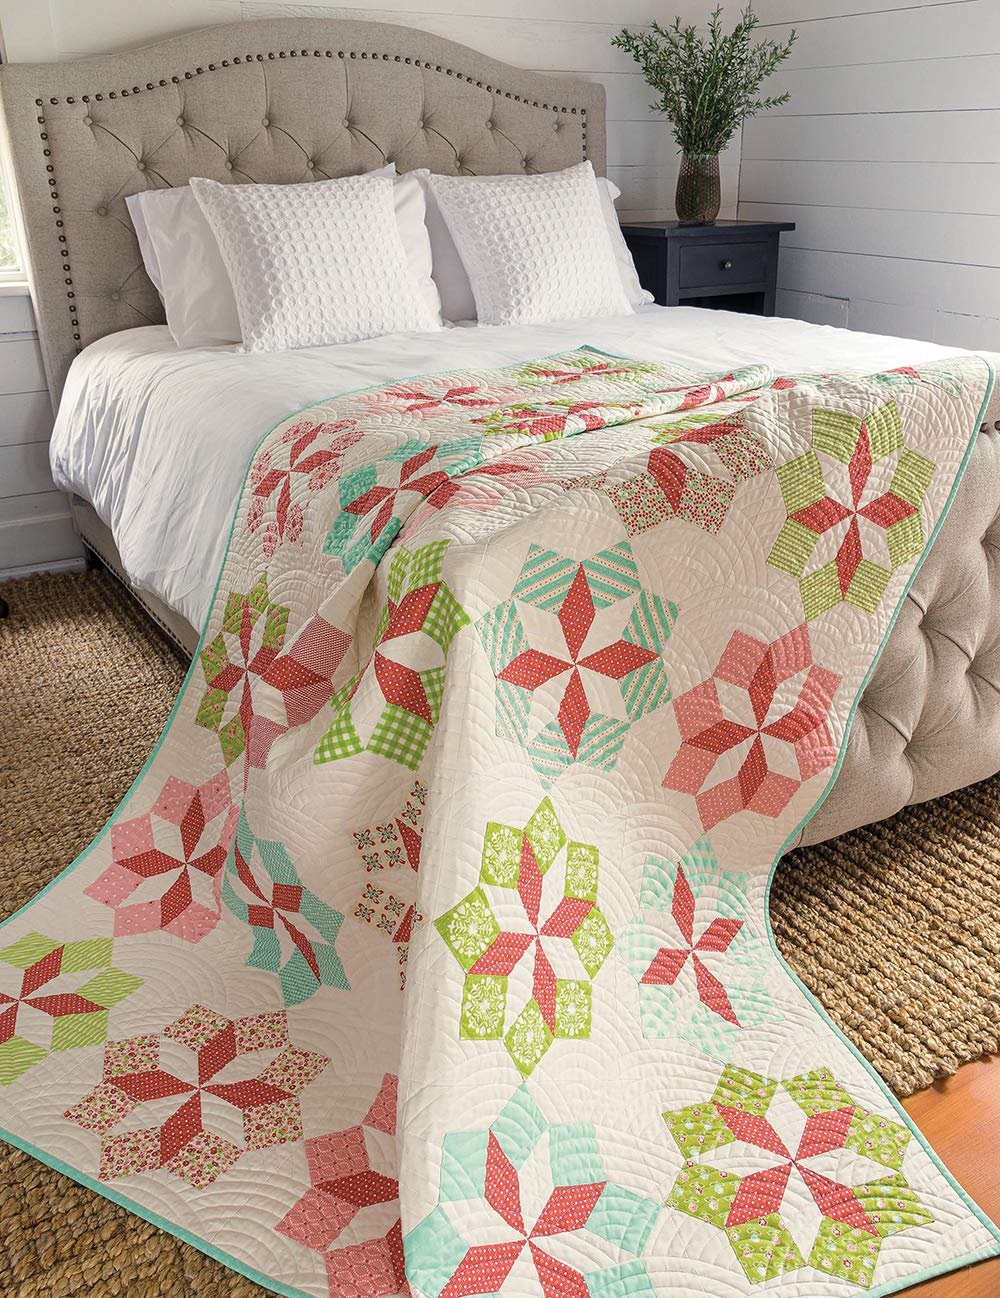 Welcome to Woodberry Way: An Inviting Collection of Delightful Quilts